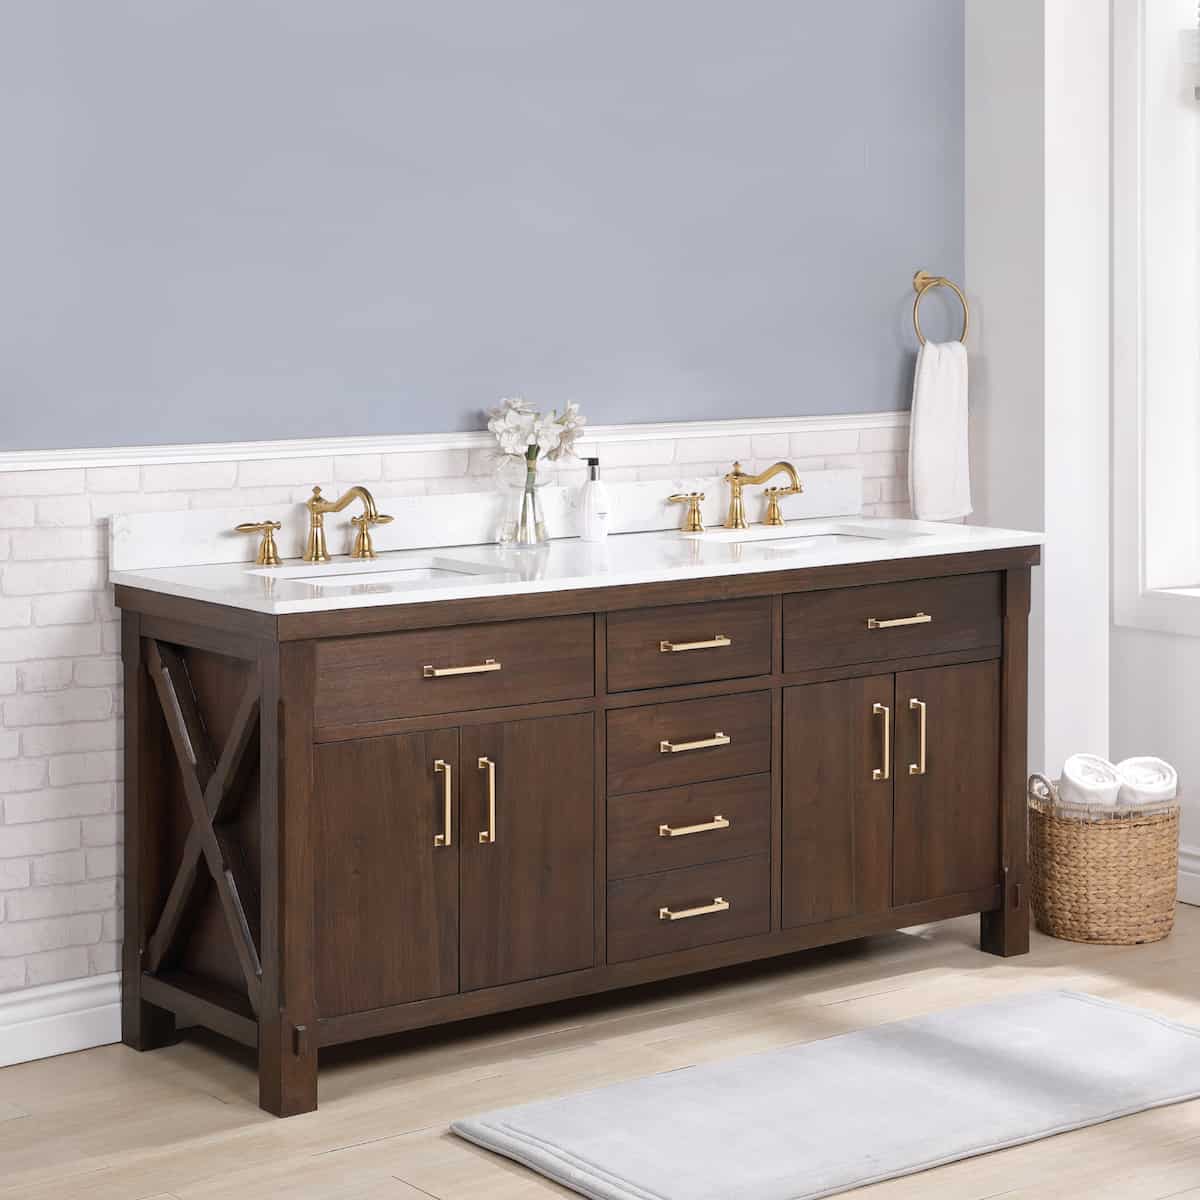 Vinnova Viella 72 Inch Freestanding Double Sink Bath Vanity in Deep Walnut Finish with White Composite Countertop Without Mirror Side 701872-DW-WS-NM